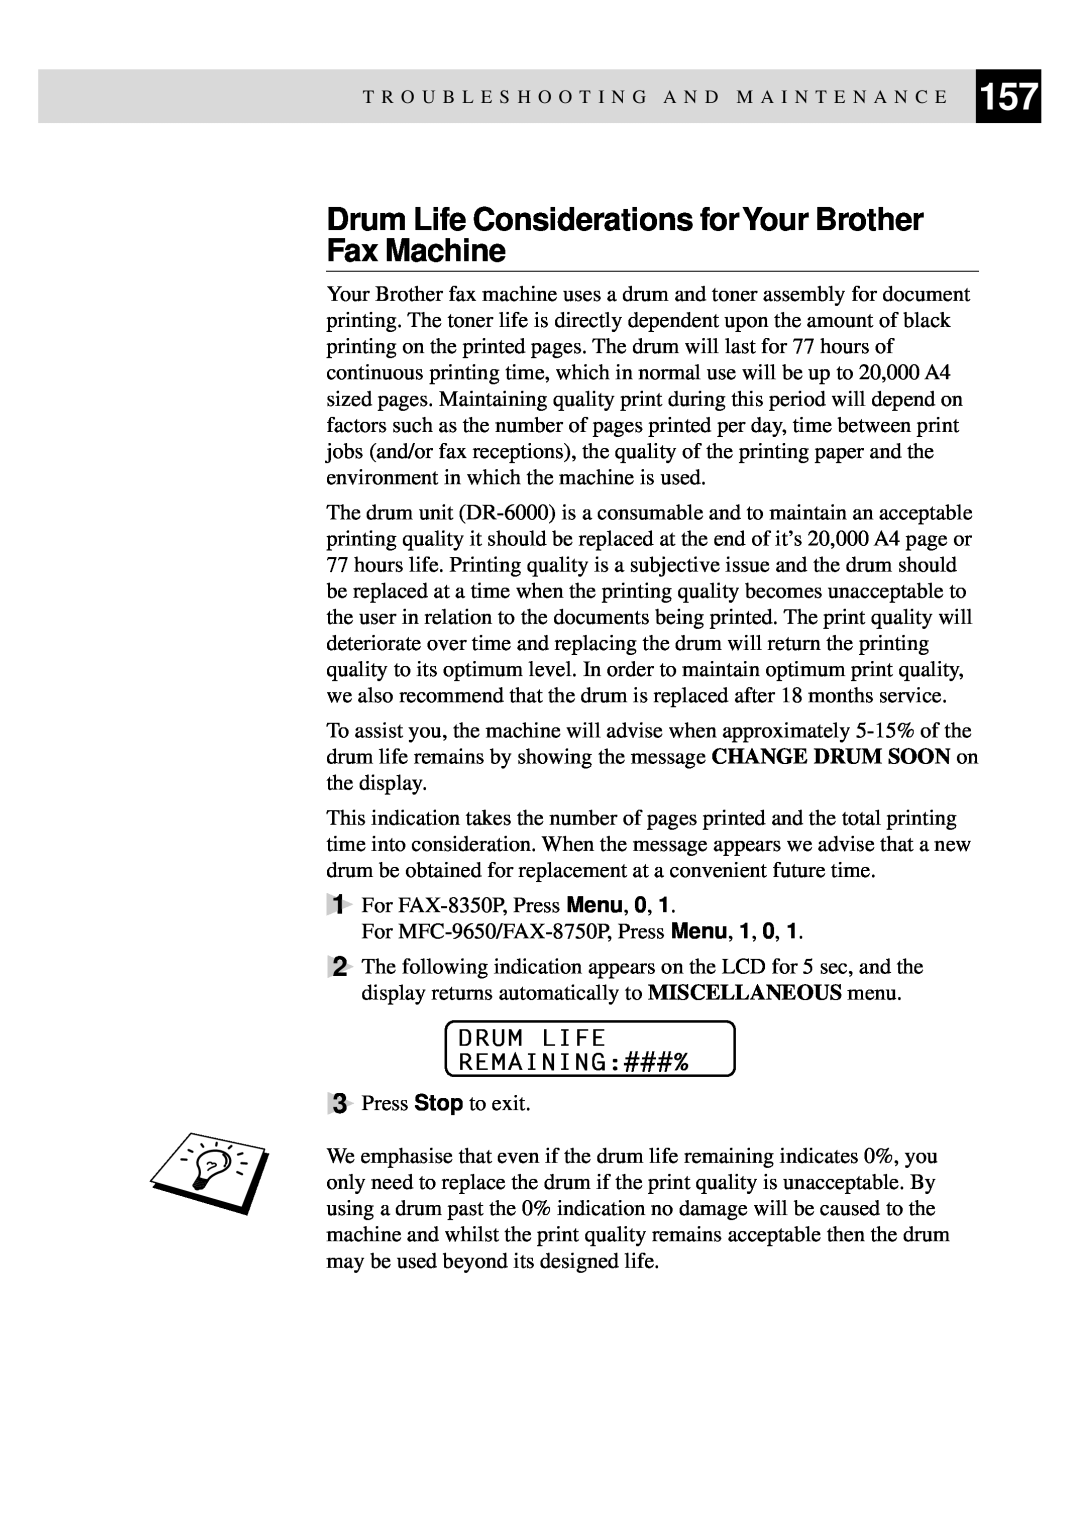 Brother MFC-9650, FAX-8350P owner manual Drum Life Considerations forYour Brother Fax Machine, Drum Life Remaining###% 